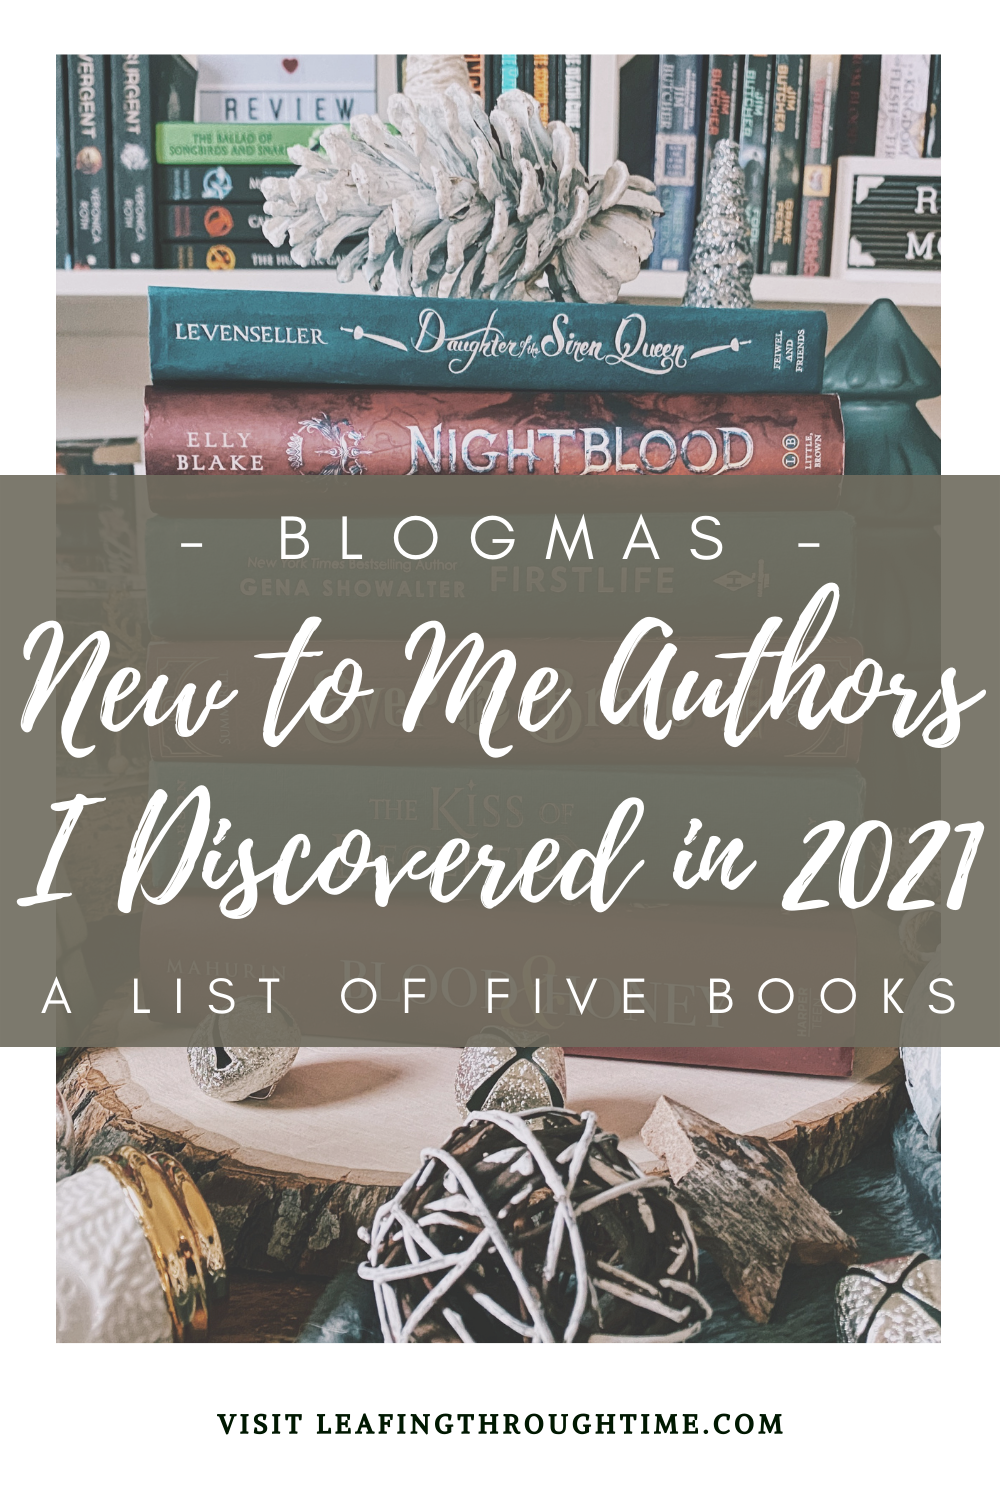 New to Me Authors I Discovered in 2021